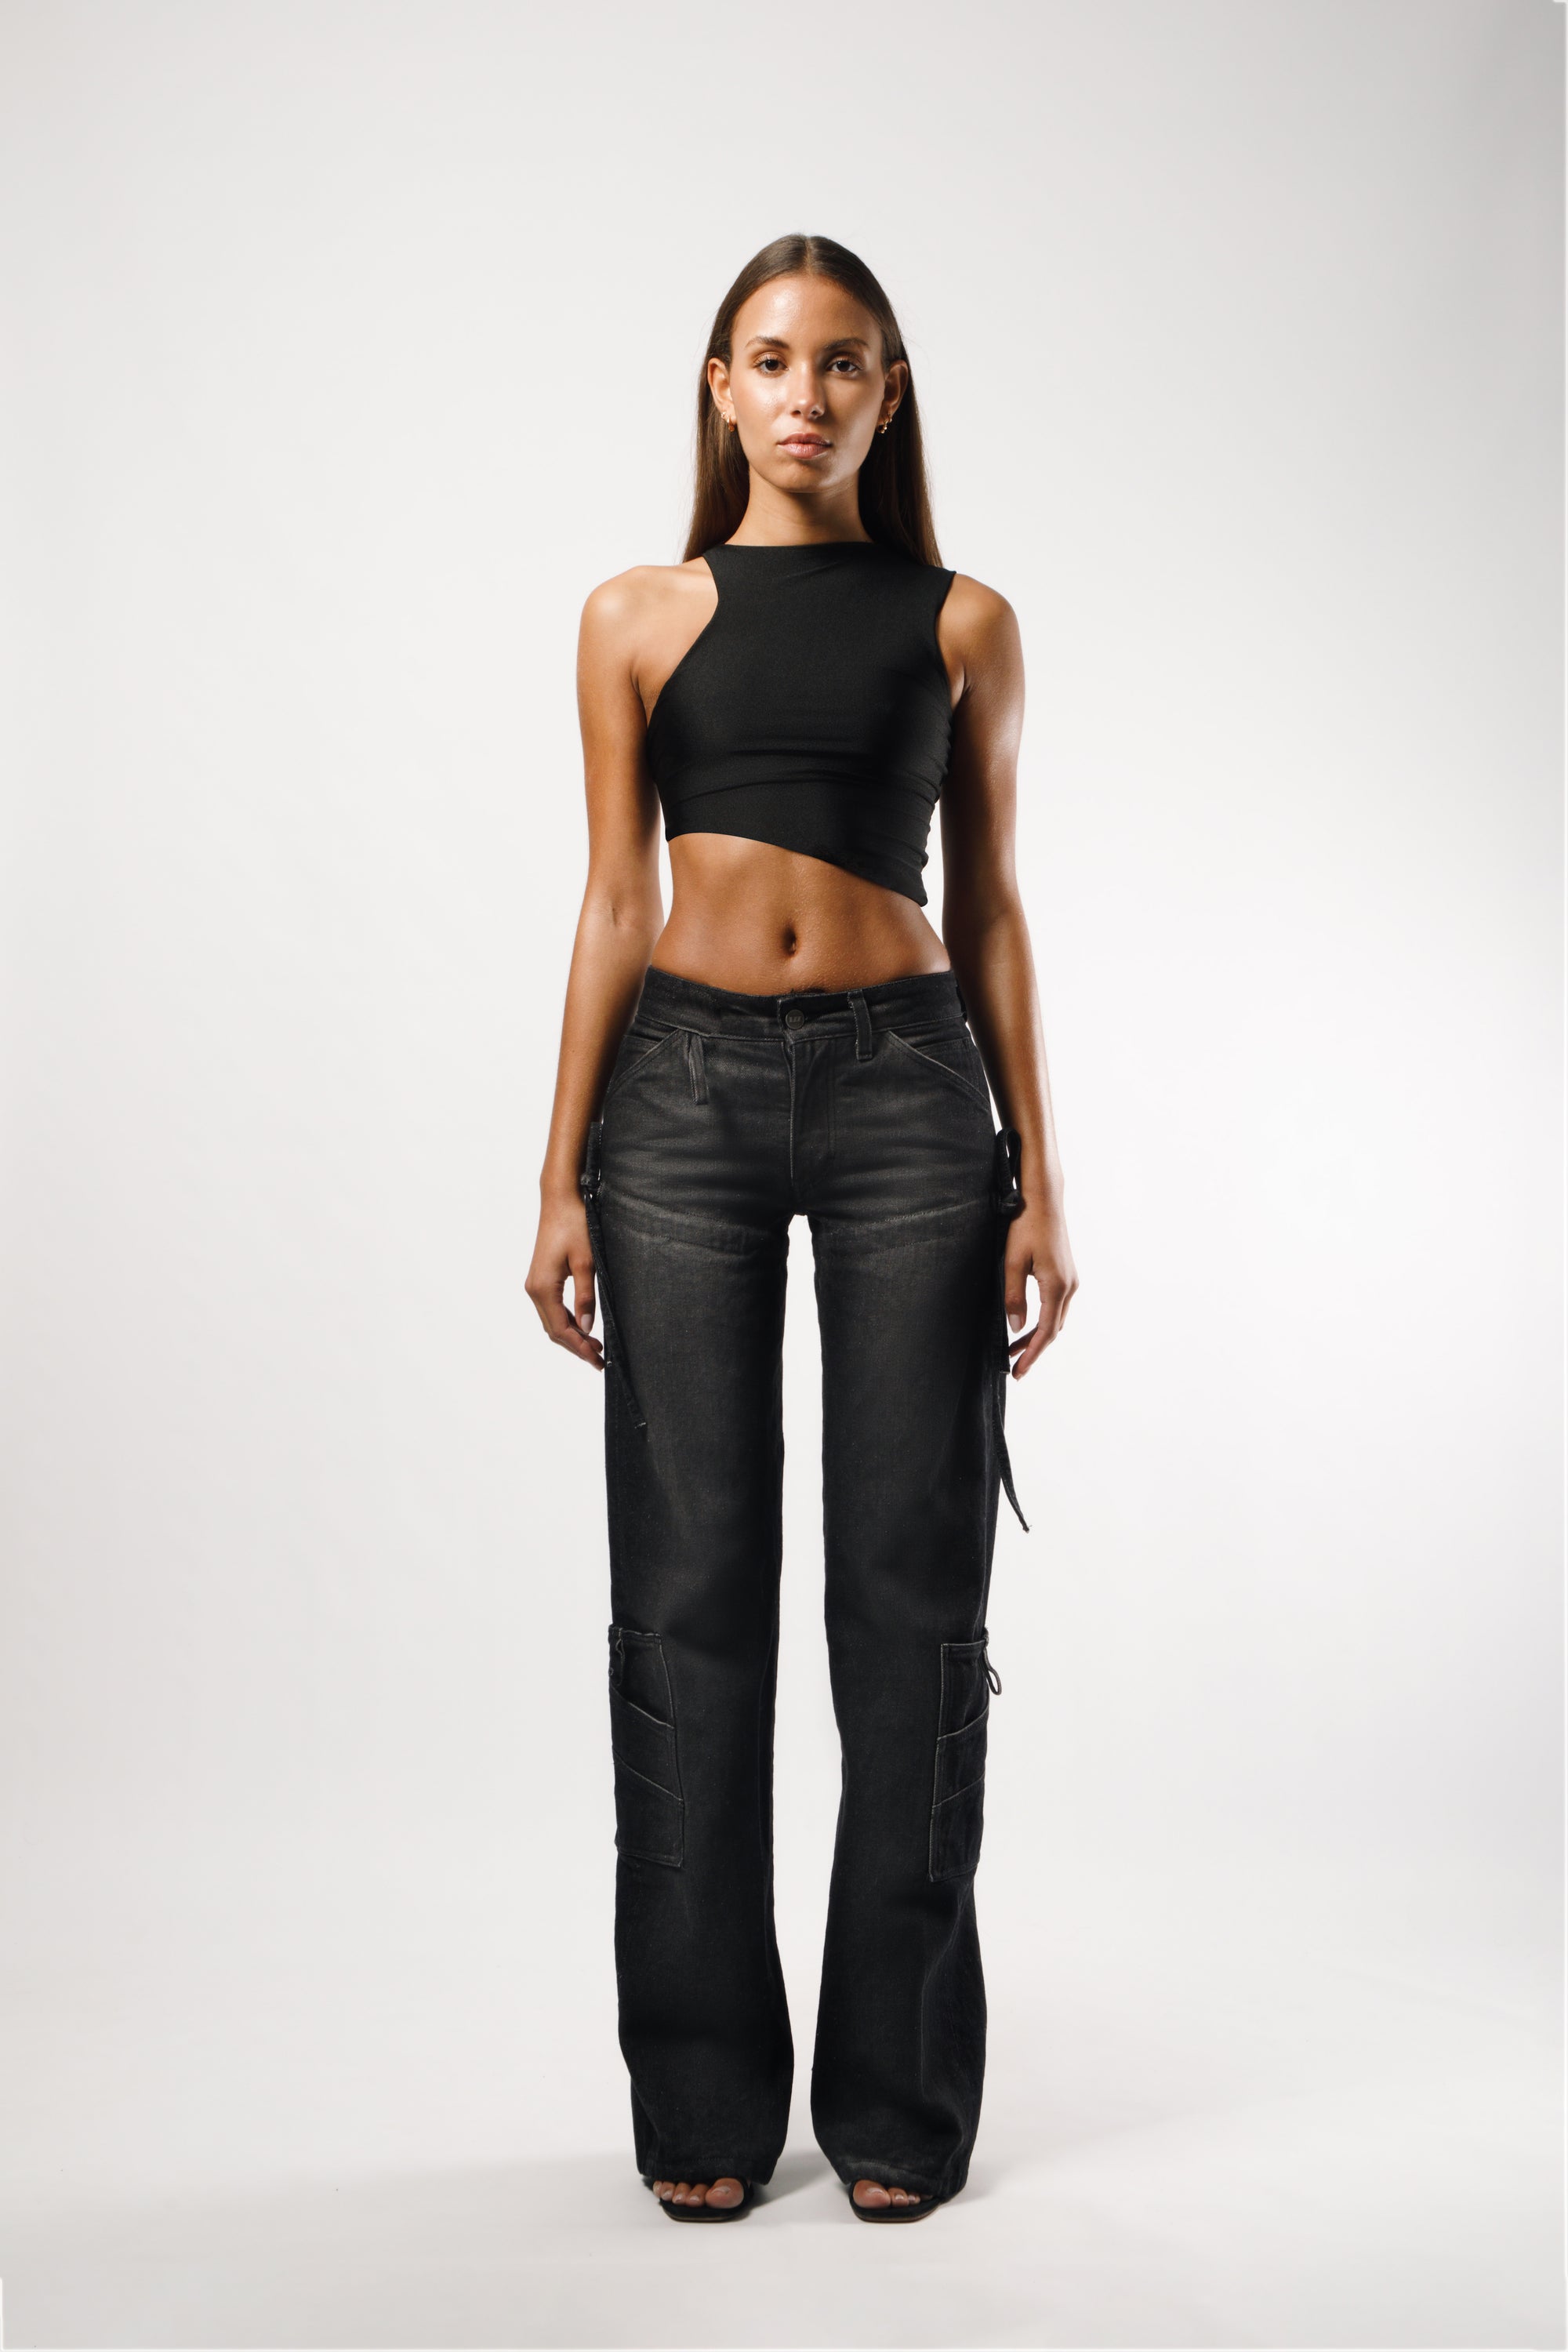 Long pants in washed black cotton with darts and opening slits on the back, adjustable cords to embellish the silhouette - front